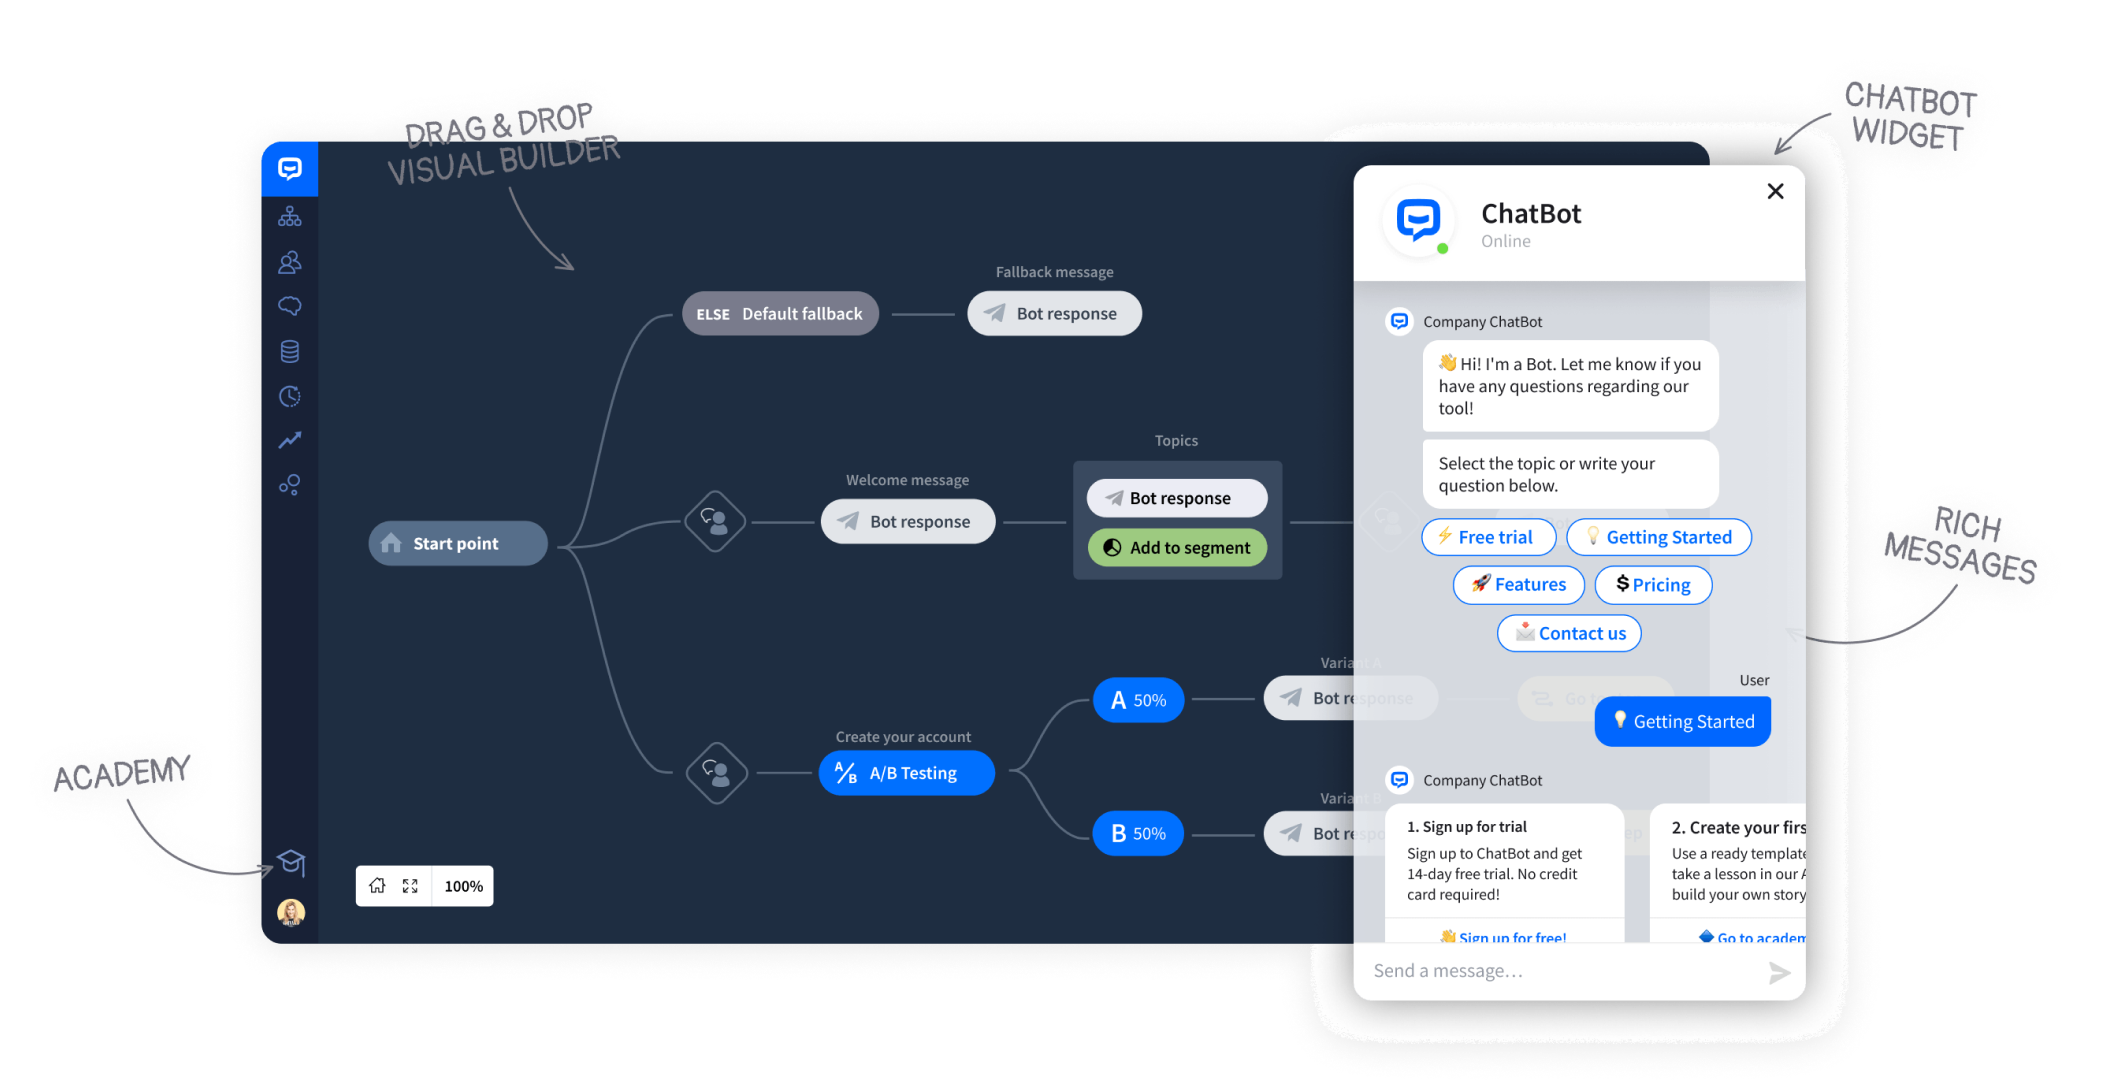 chatbot overview